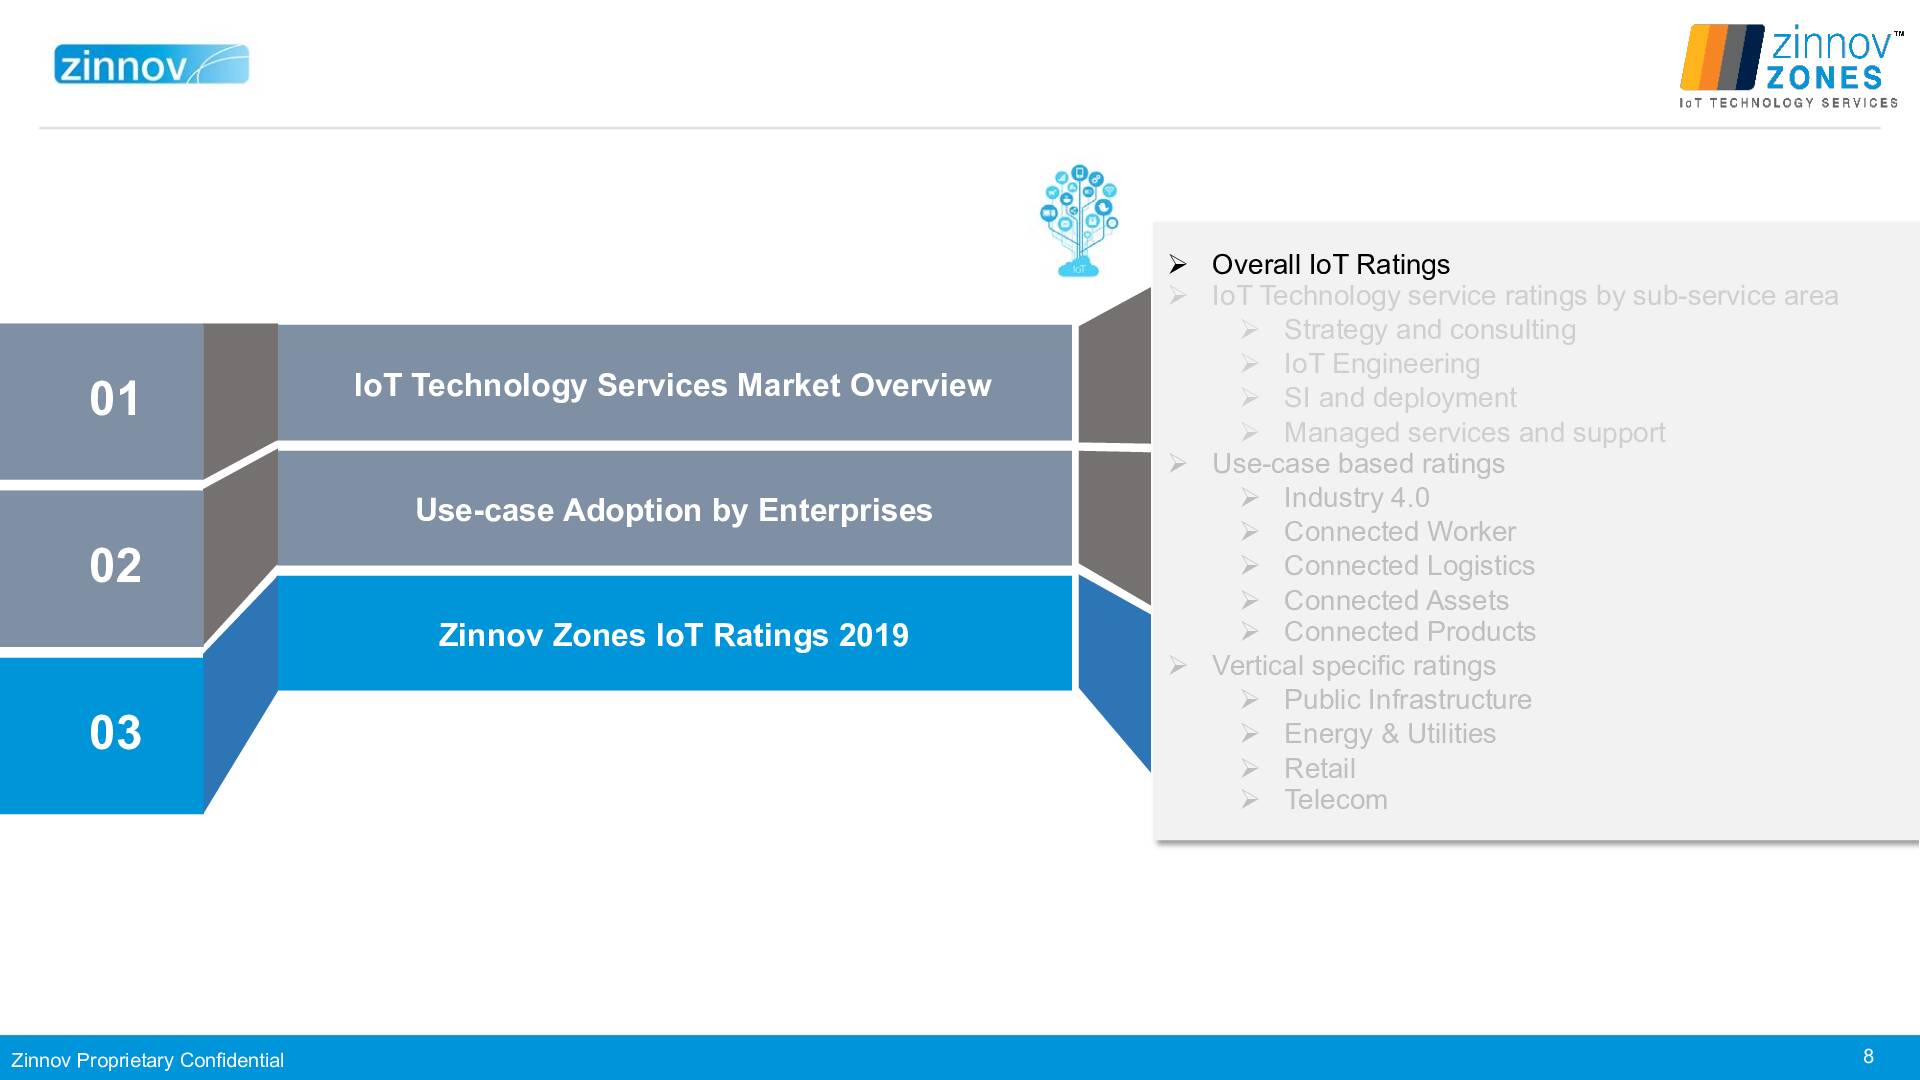 Zinnov Zones Iot Technology Services 2019 Ratings8